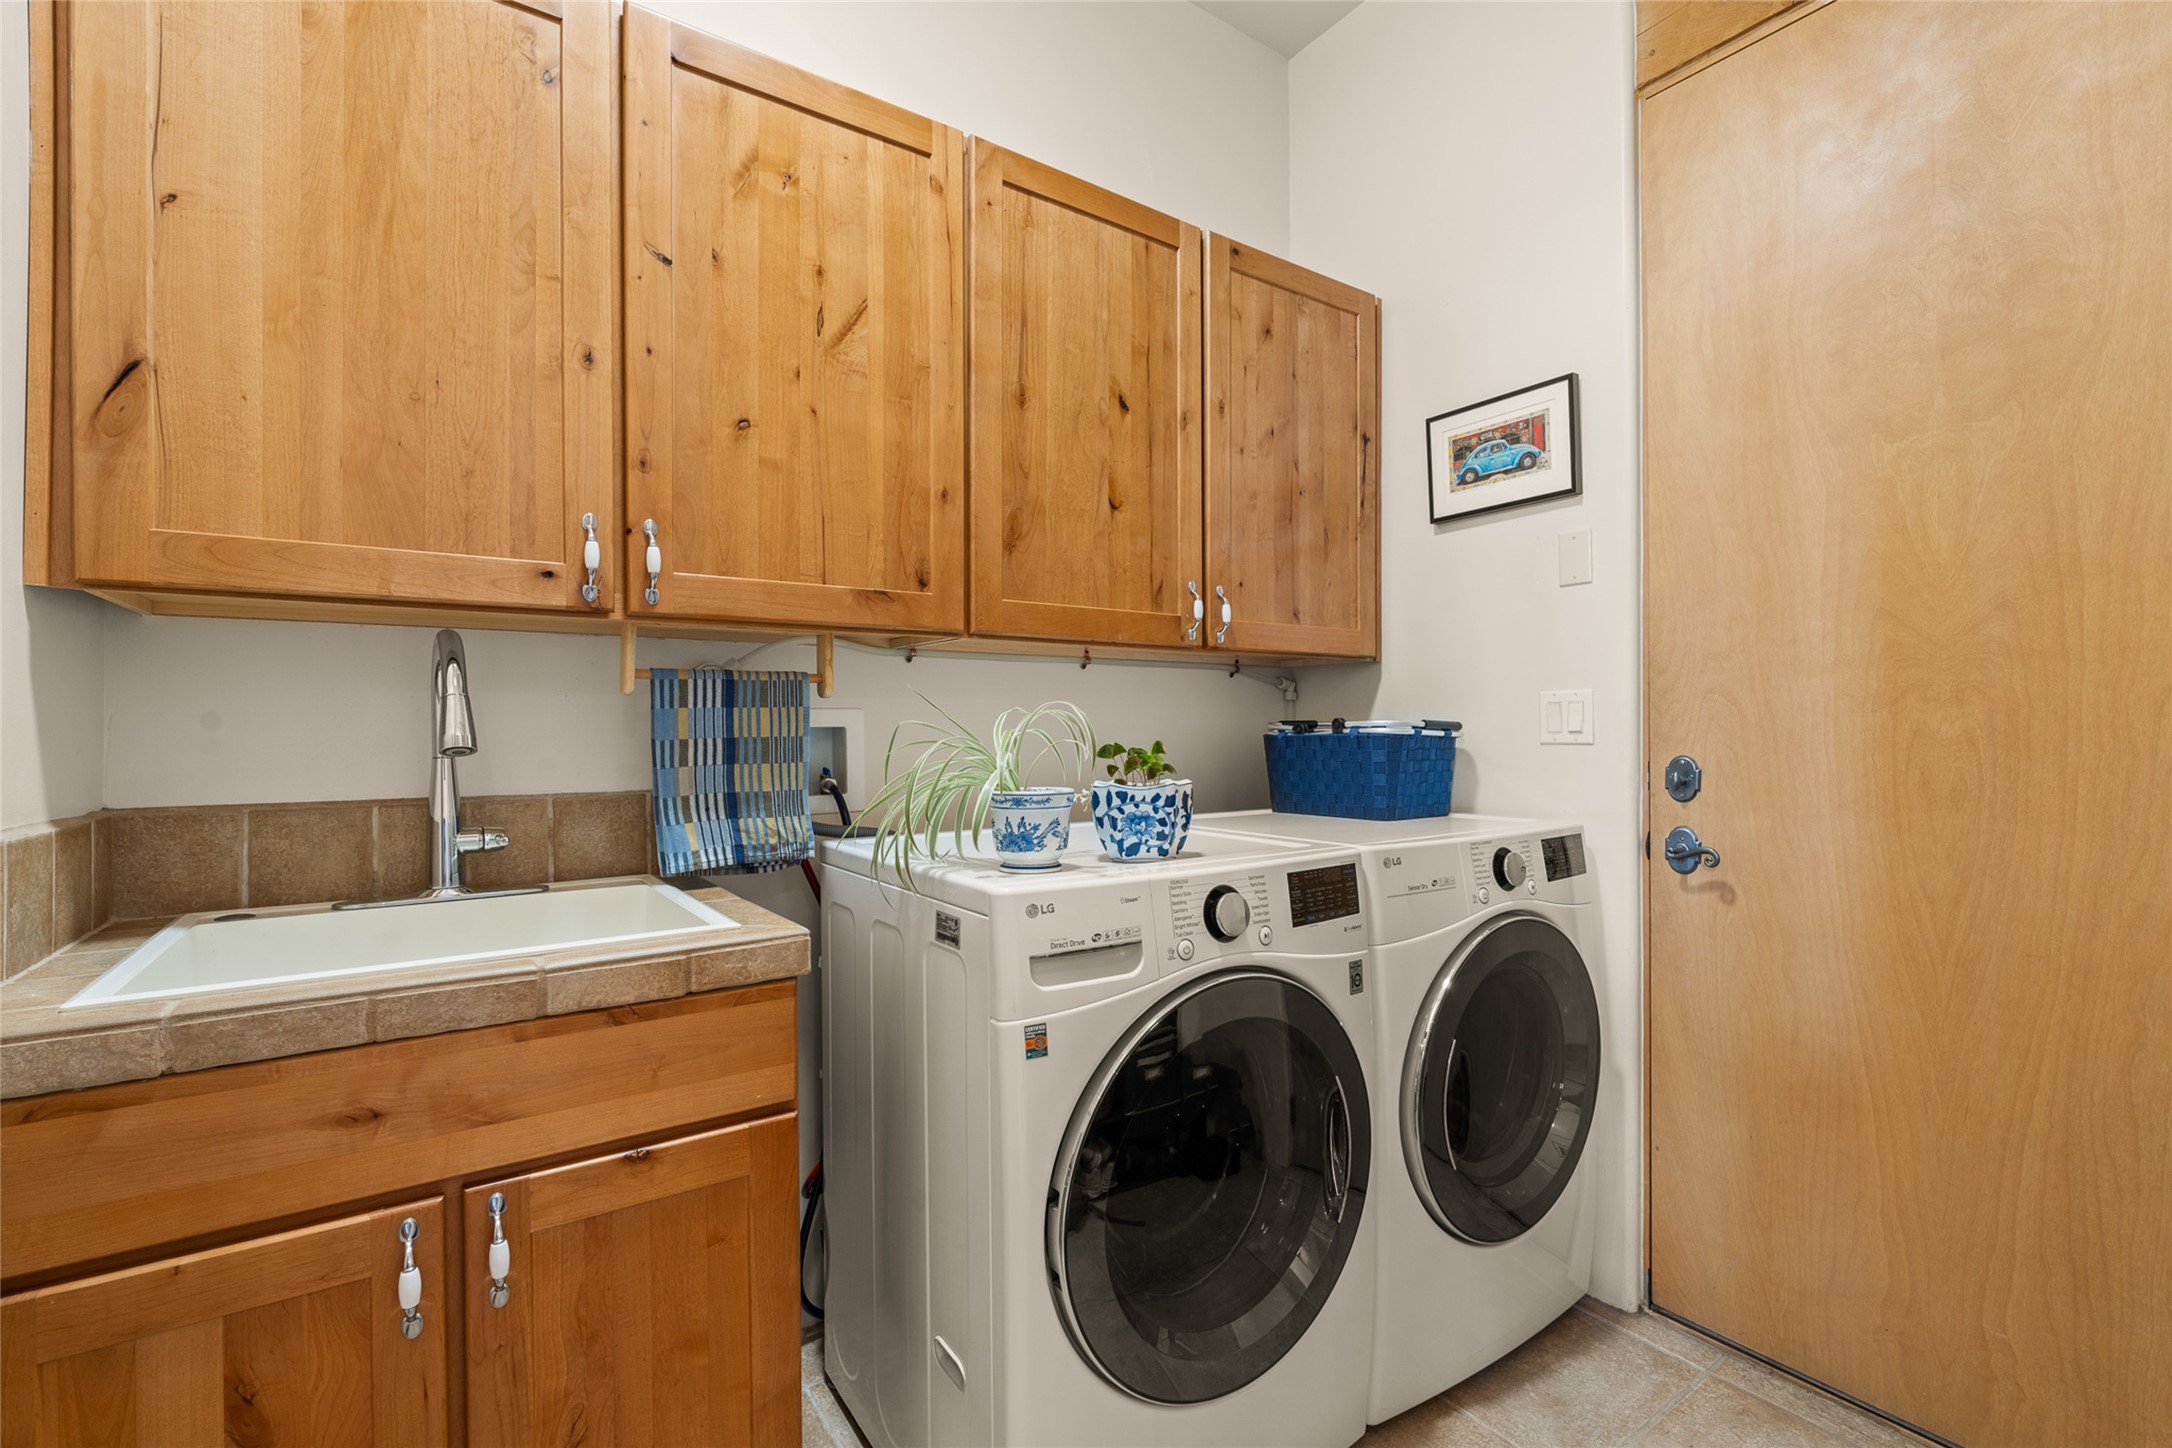 Laundry Room & Access to Garage